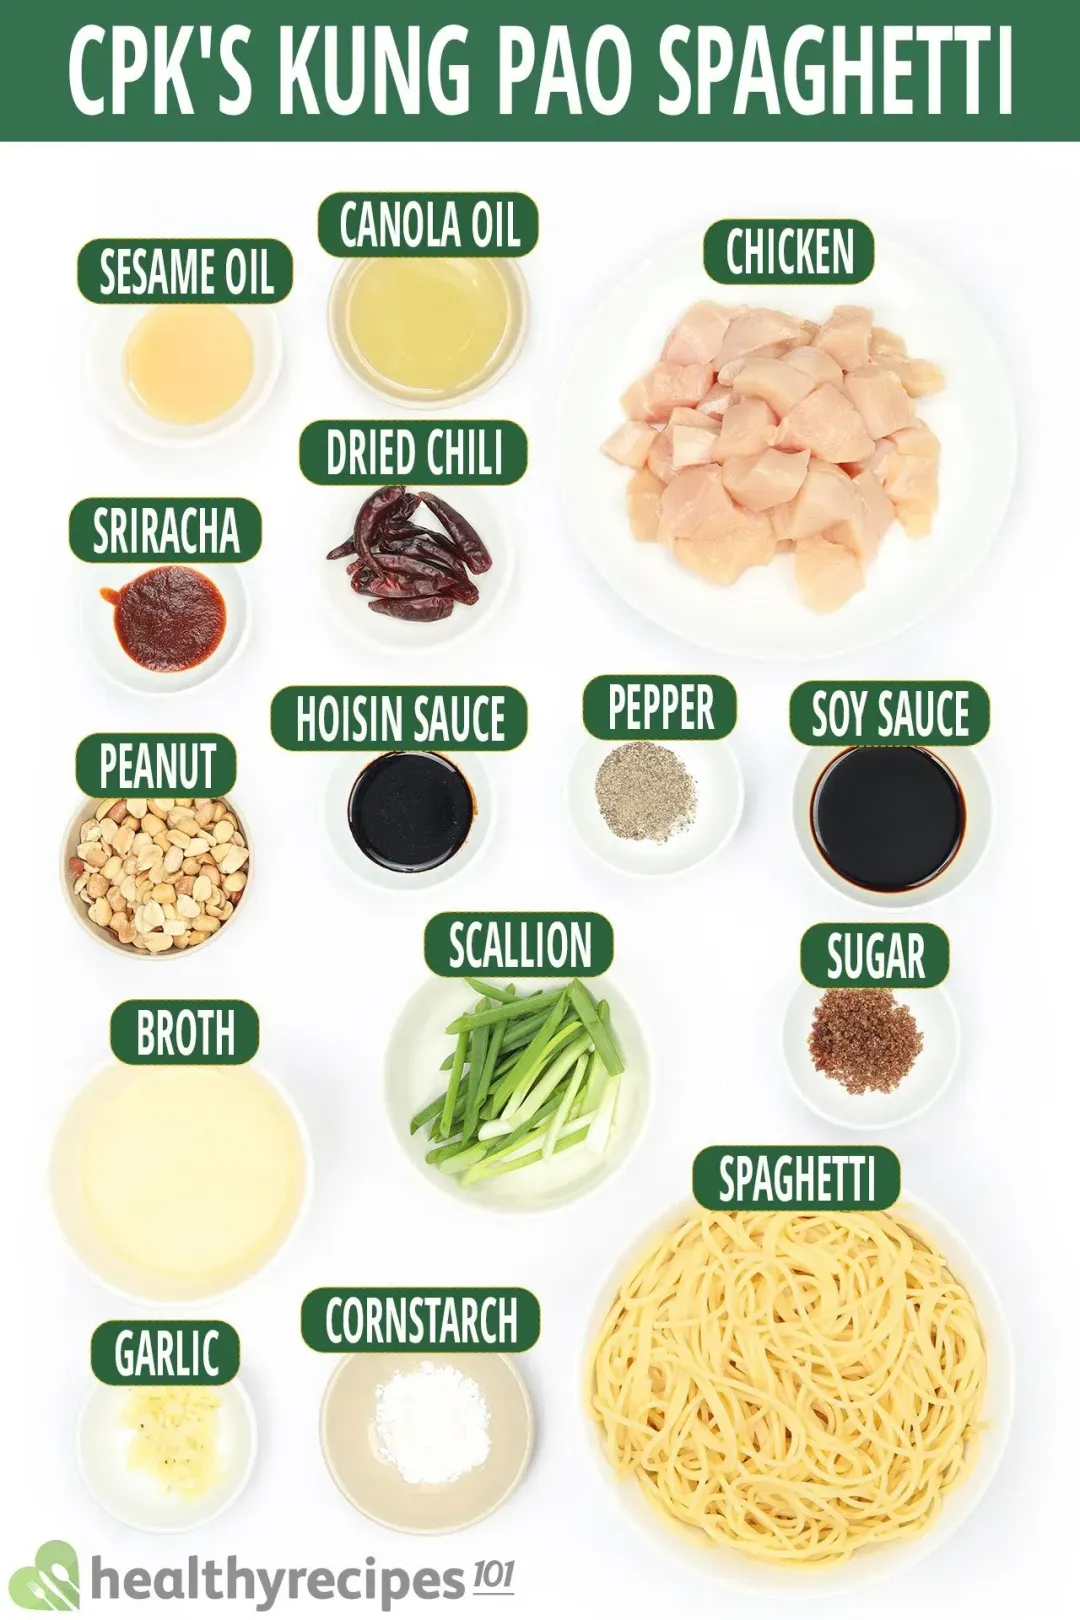 ingredients for kung pao spaghetti